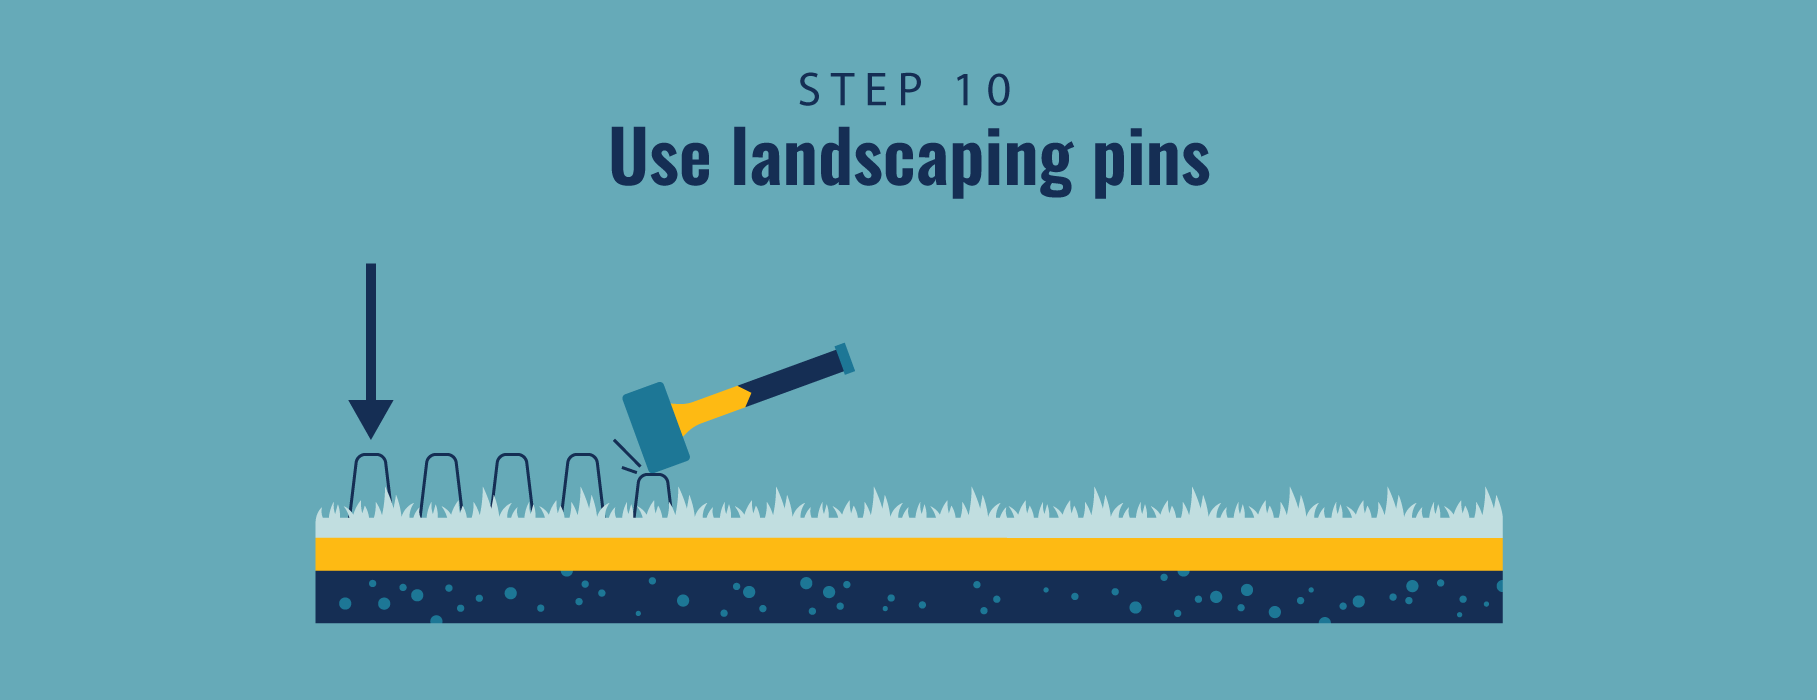 artificial turf step 10 use landscaping pins